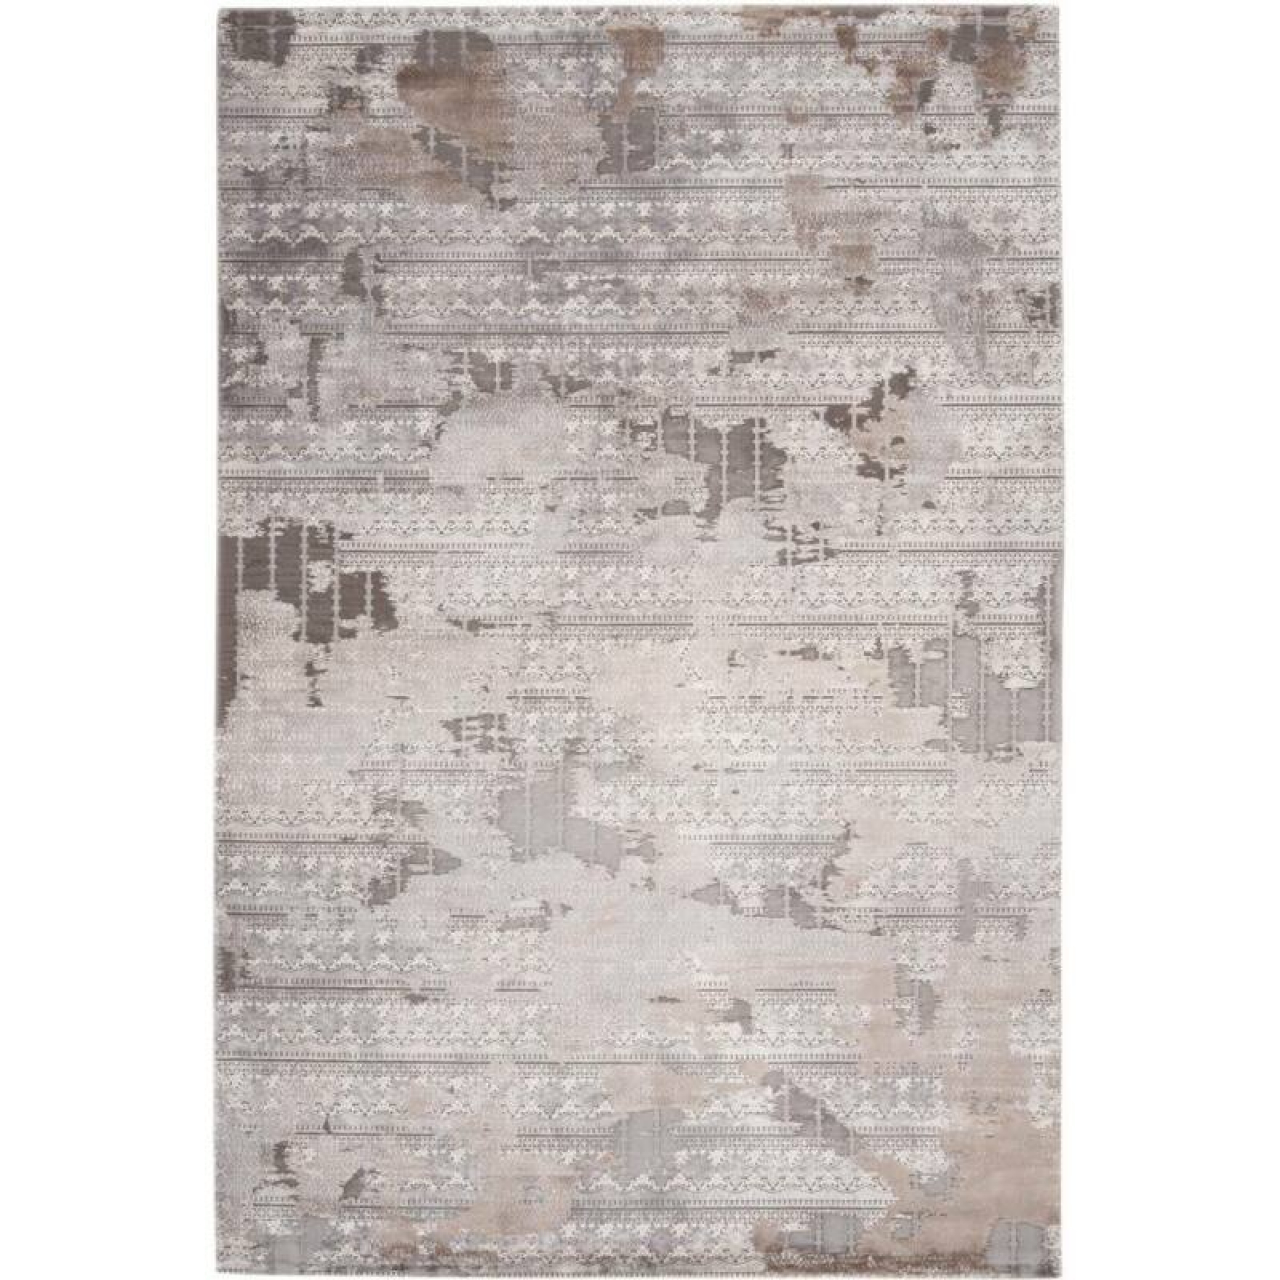 Obsession Haute Couture Jewel 955 Taupe szőnyeg-160x230